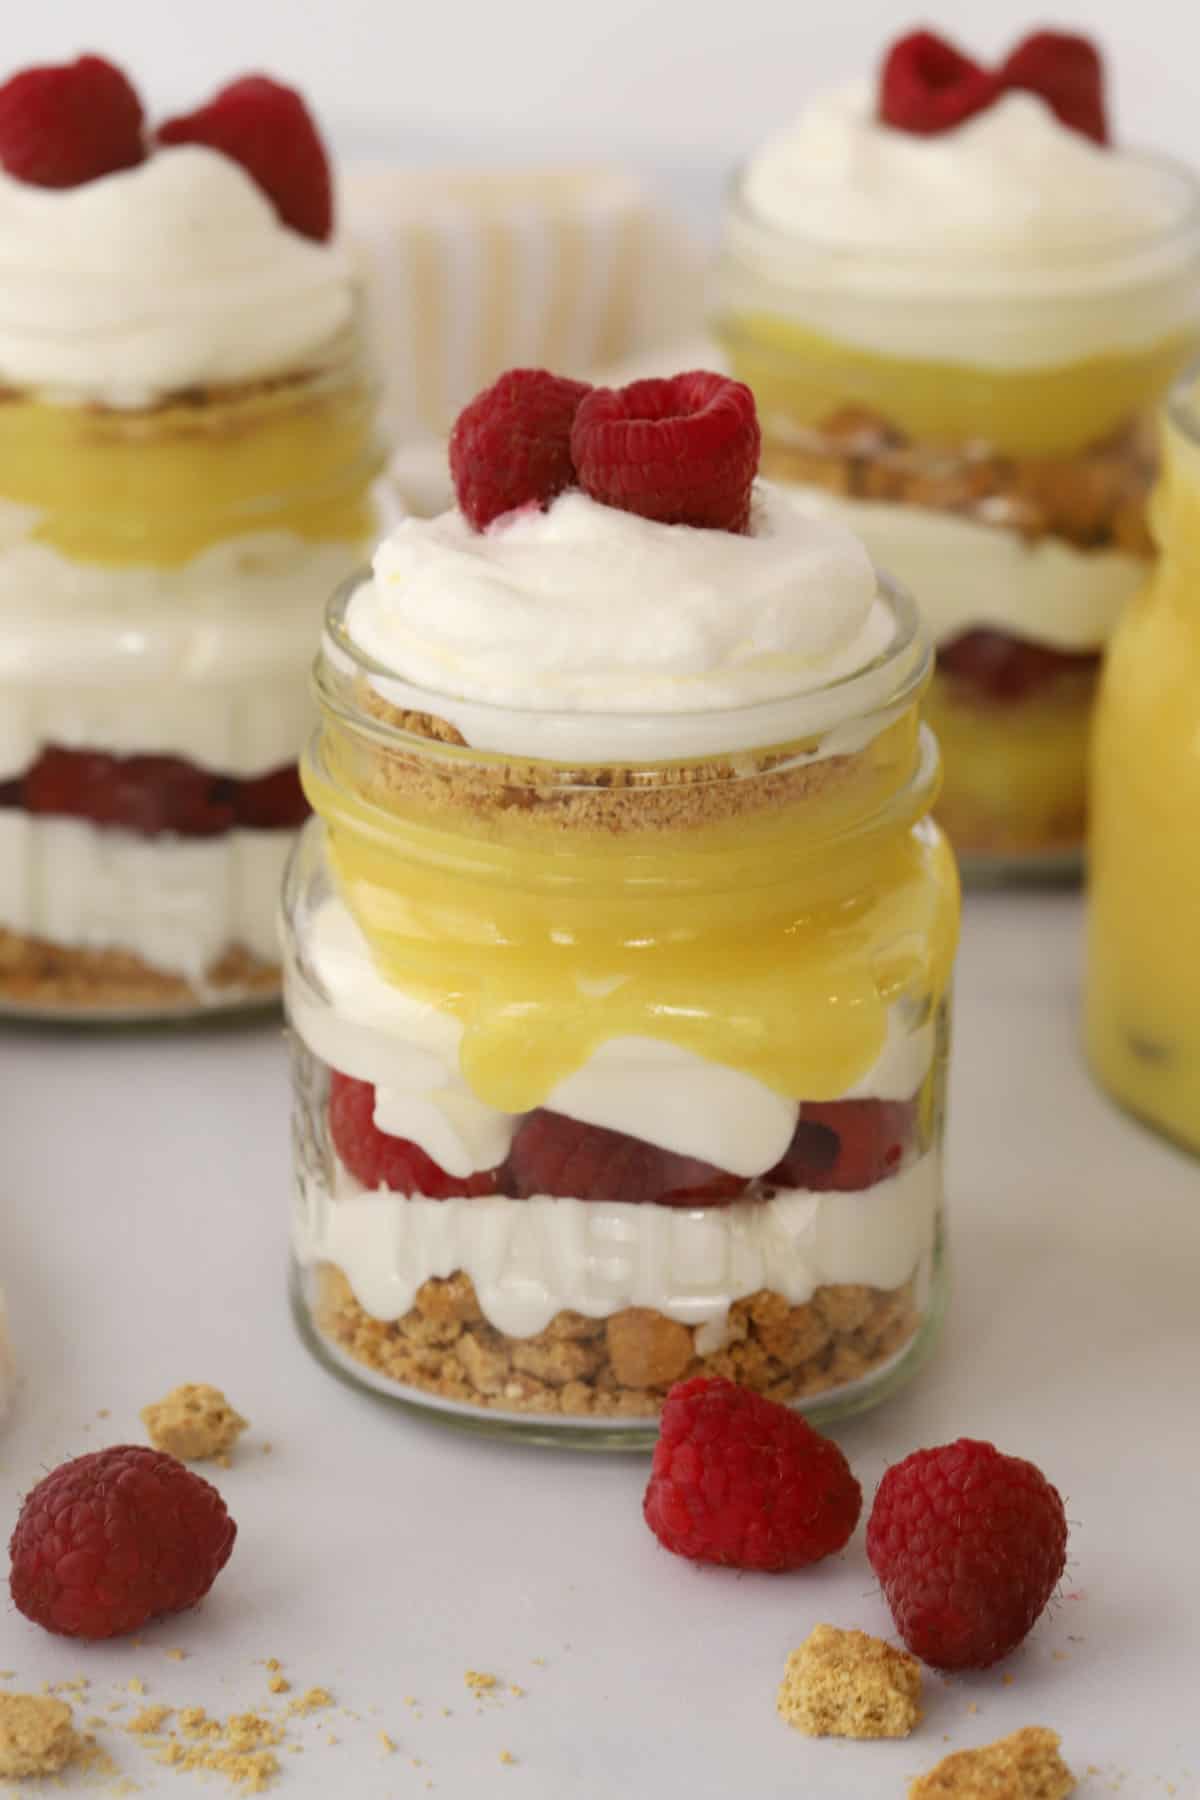 Parfaits built in small glass mason jars, with layers of curd, whipped cream, raspberries and cookies.